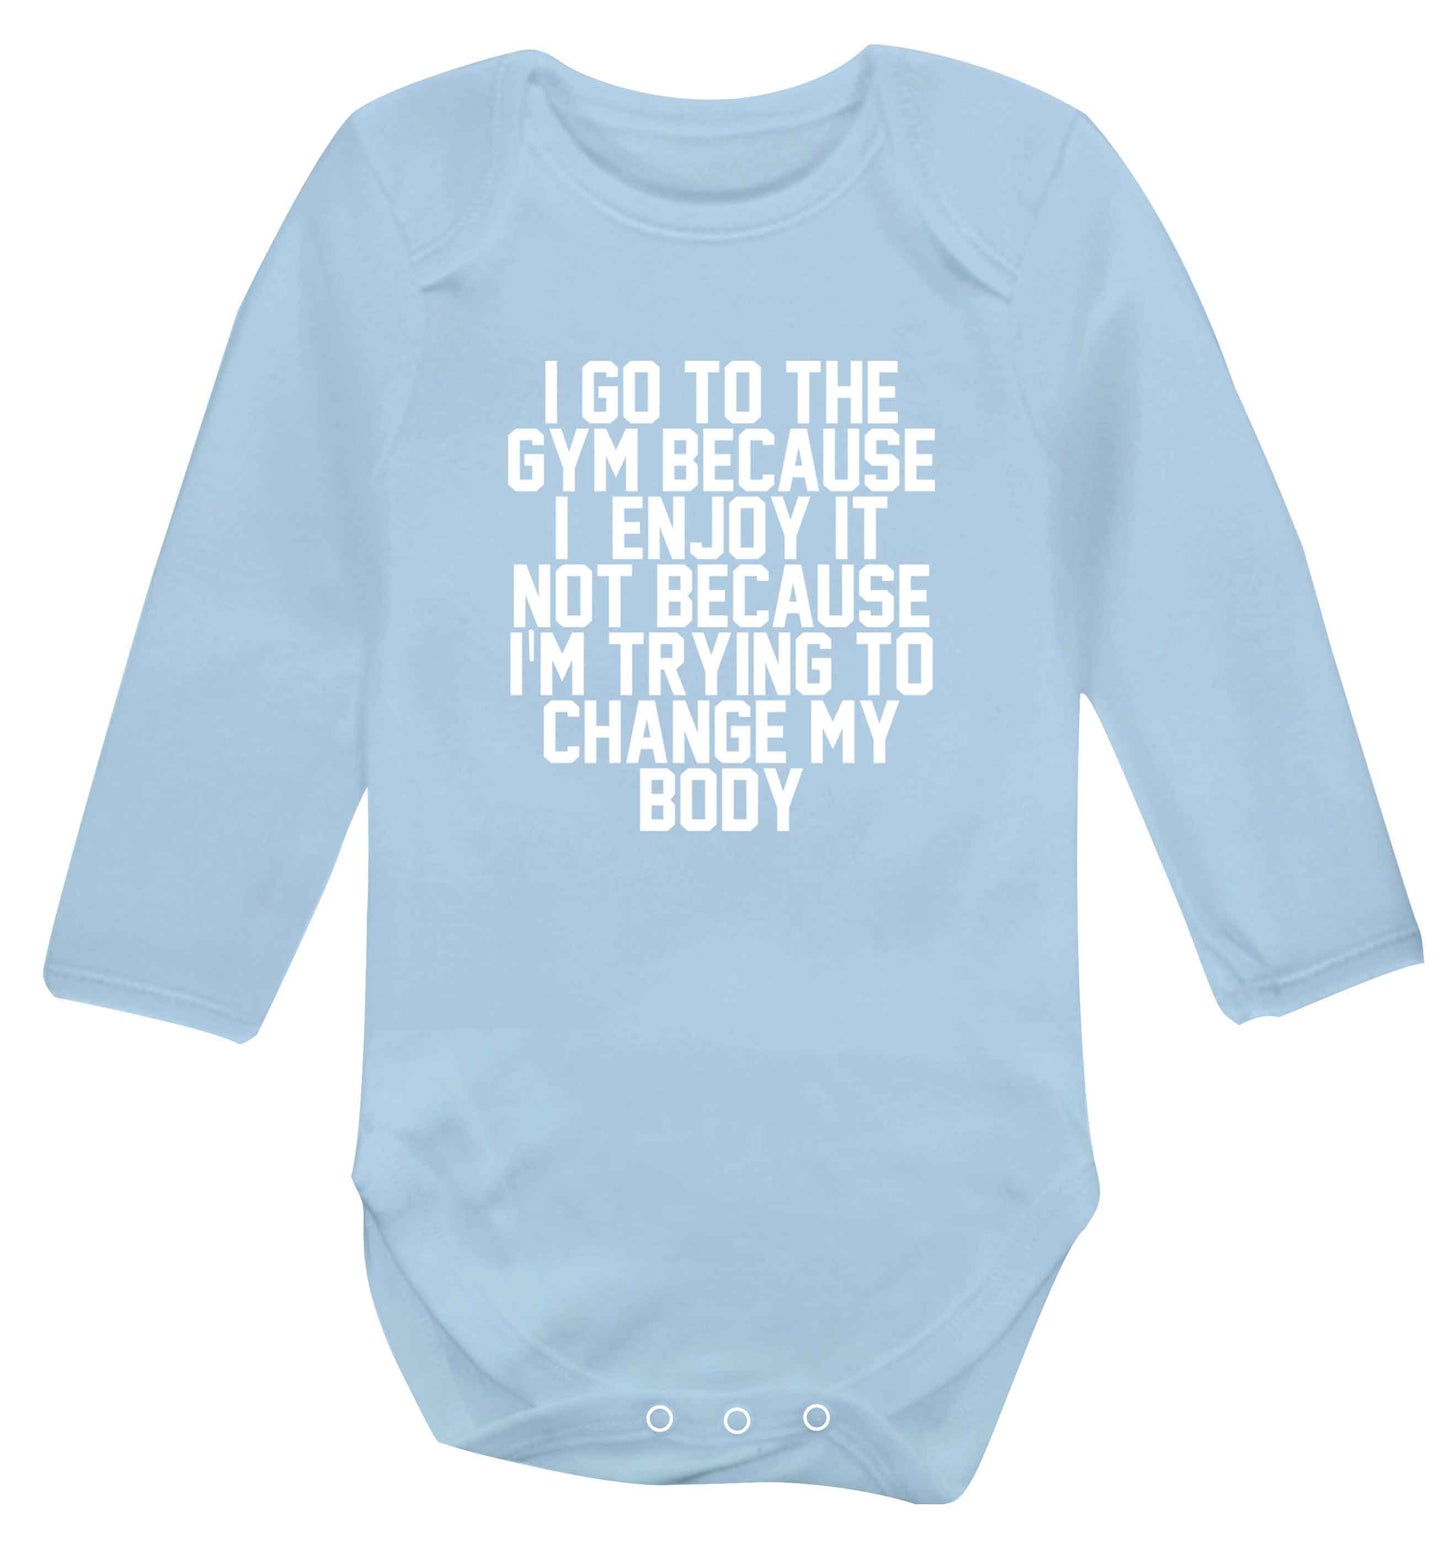 I go to the gym because I enjoy it not because I'm trying to change my body baby vest long sleeved pale blue 6-12 months